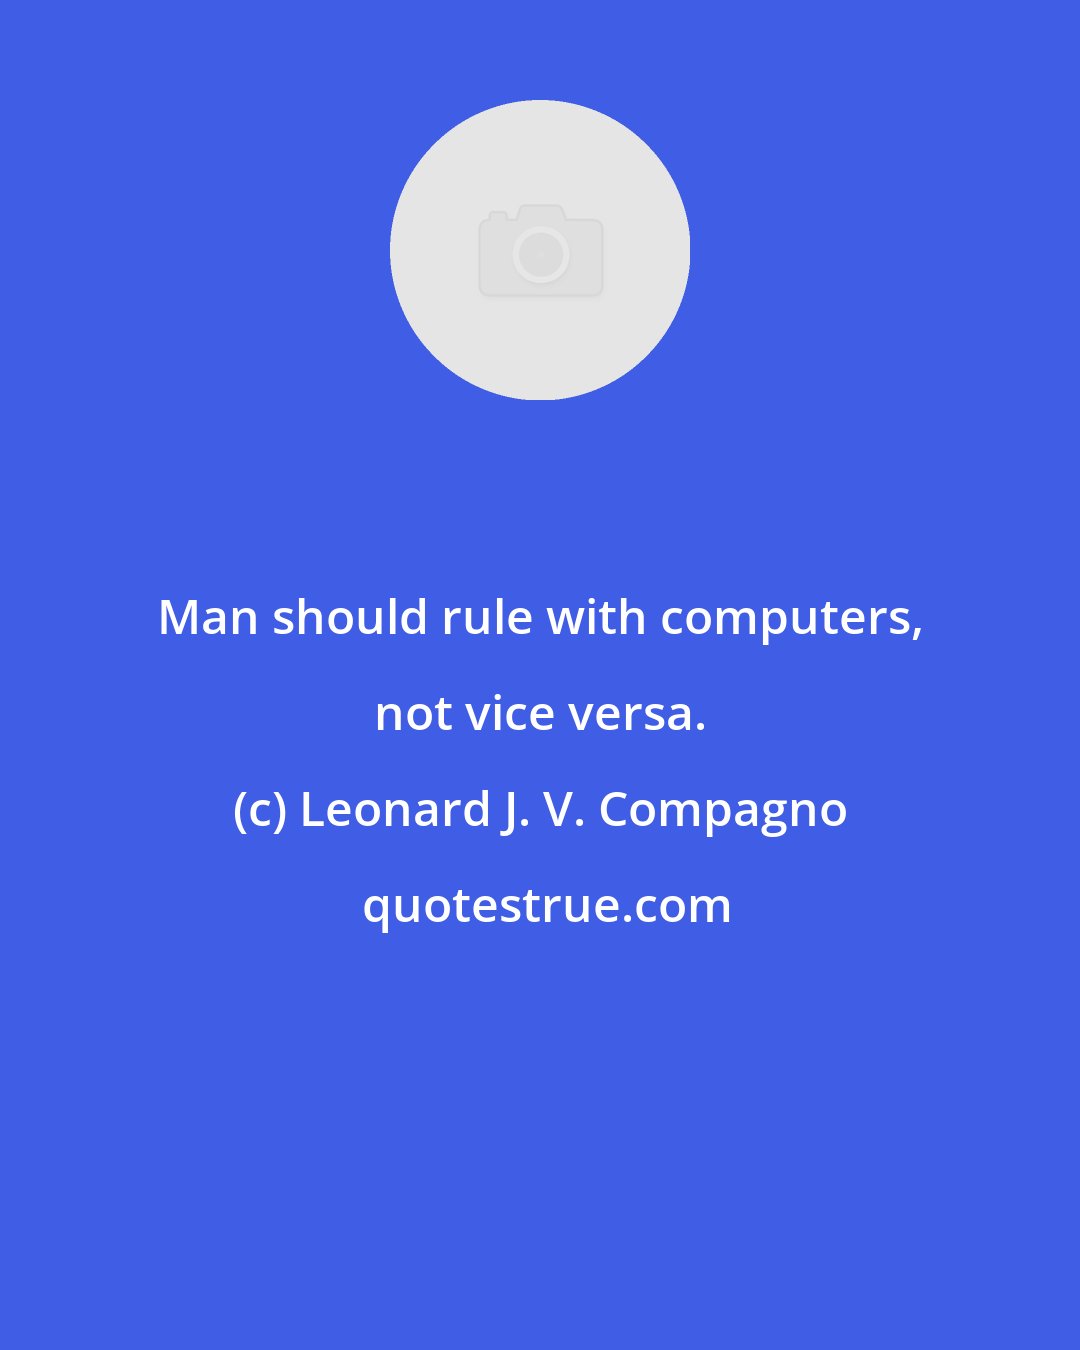 Leonard J. V. Compagno: Man should rule with computers, not vice versa.